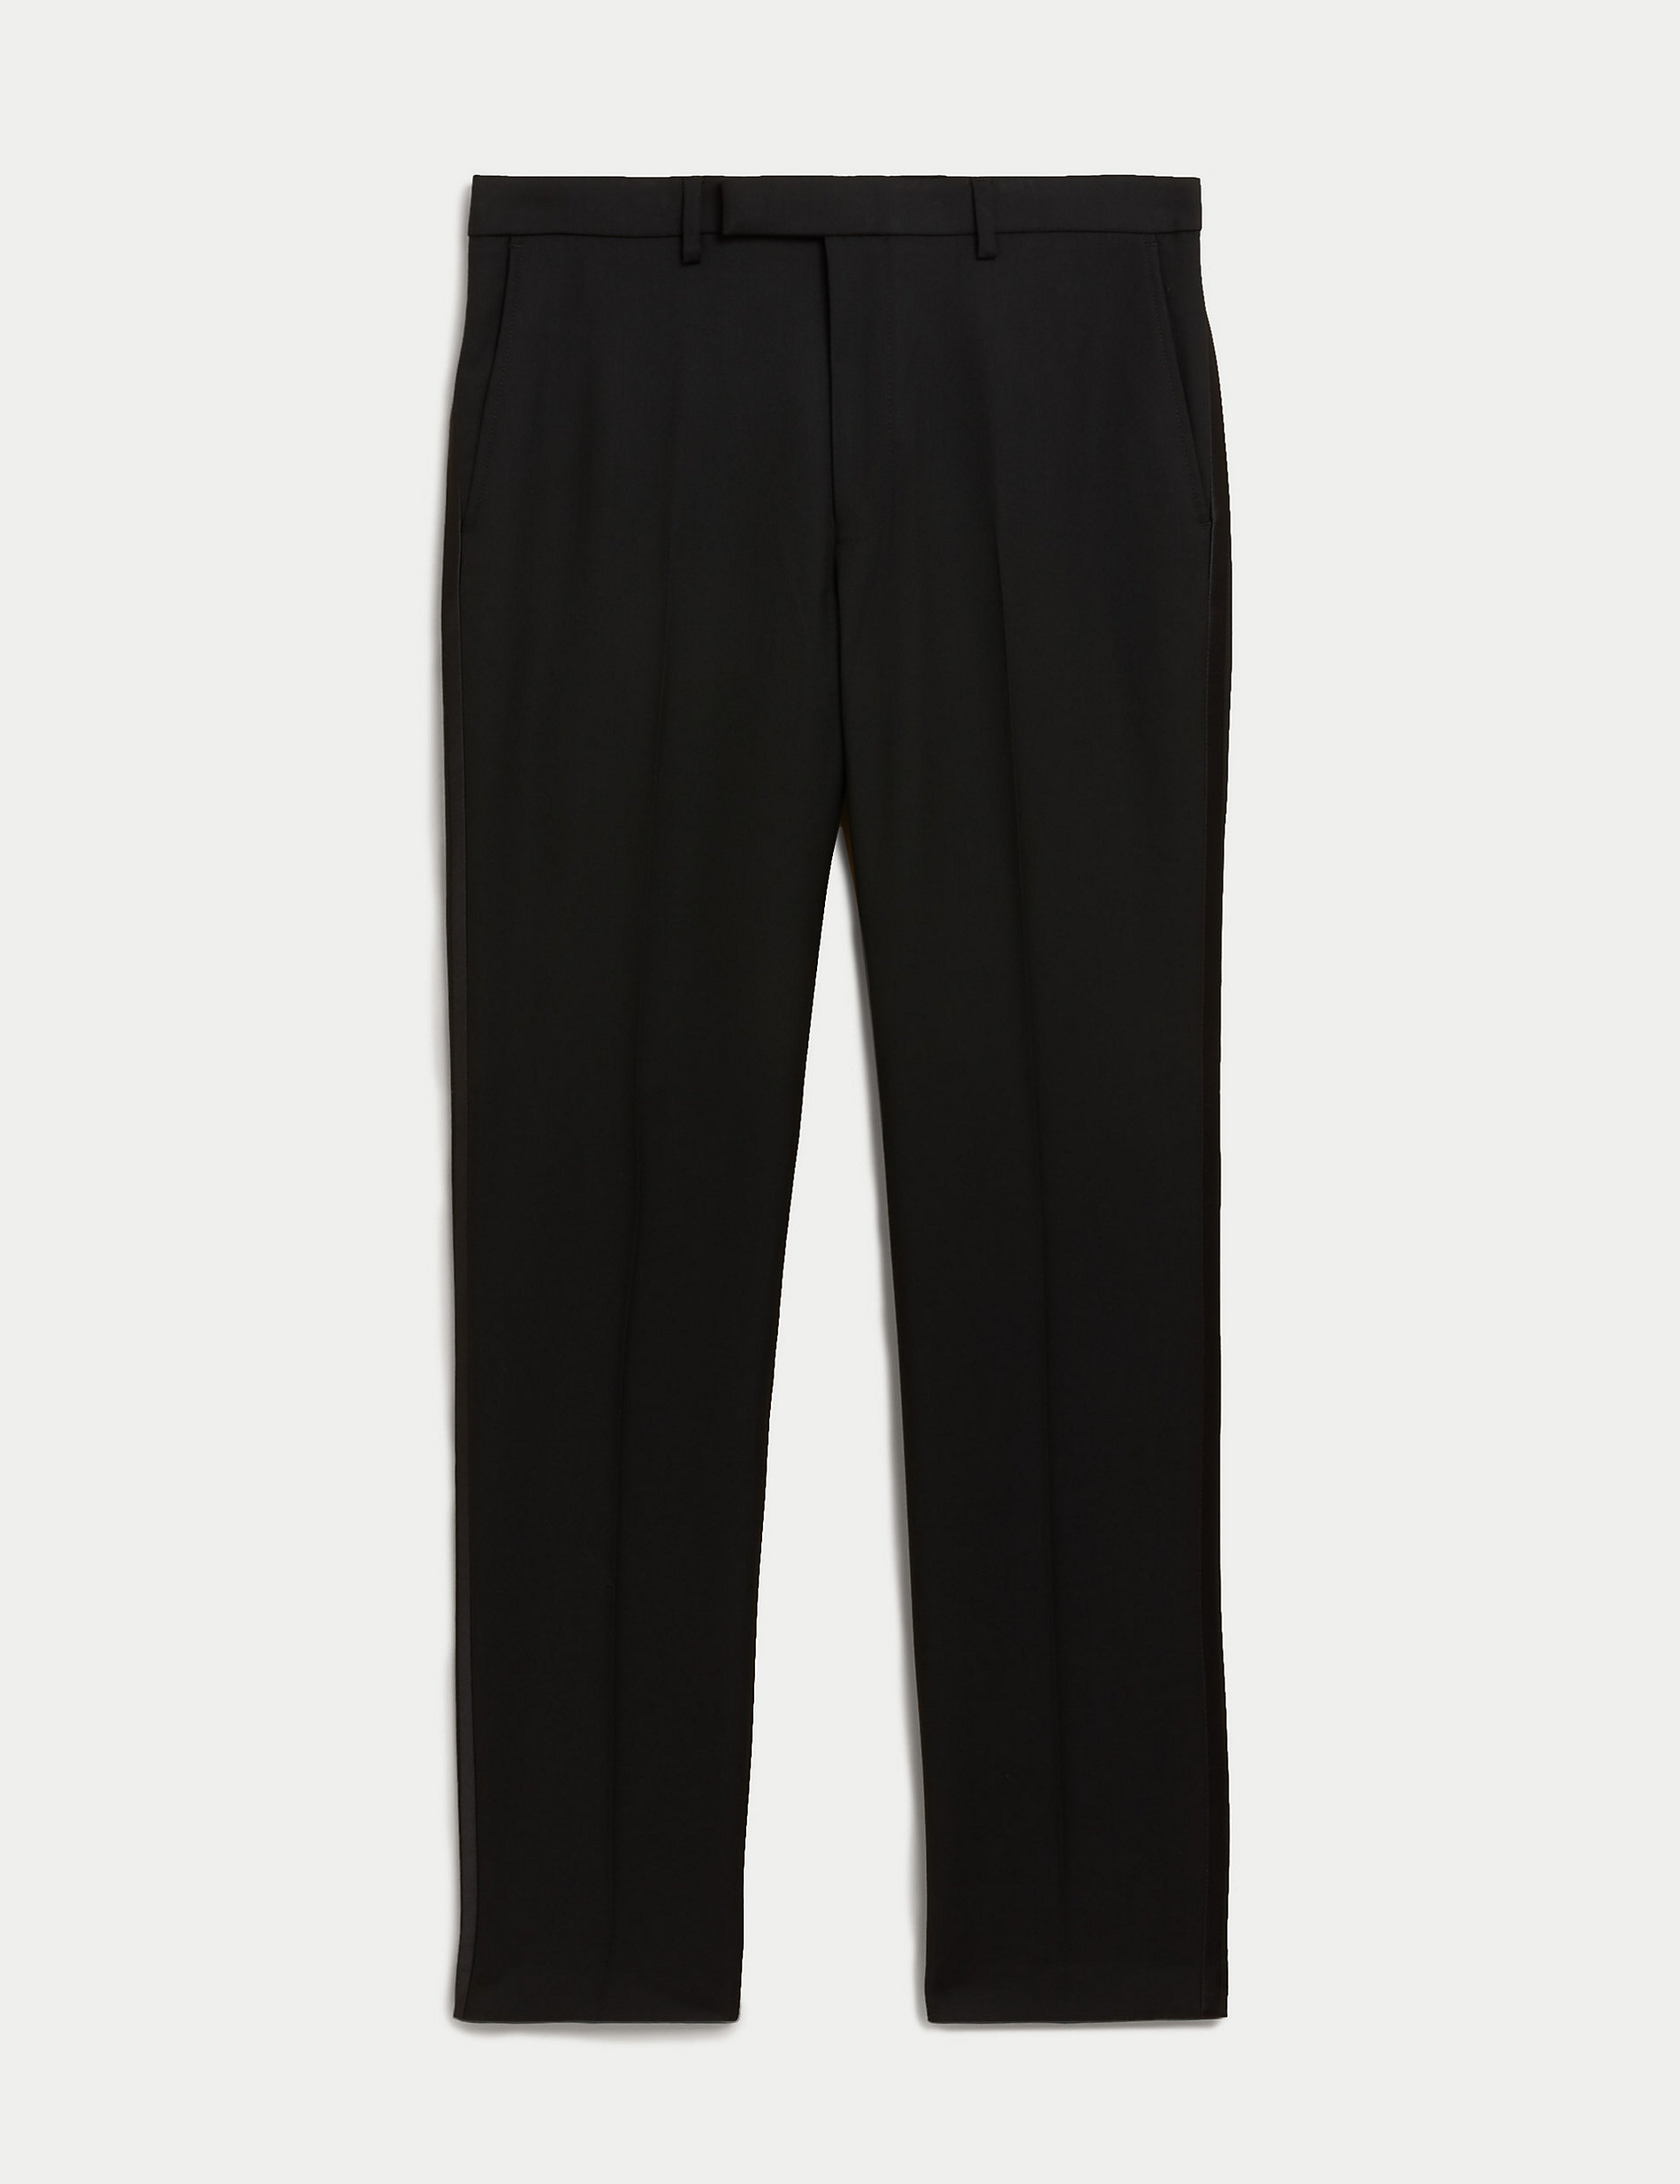 Slim Fit Flat Front Stretch Tuxedo Trousers